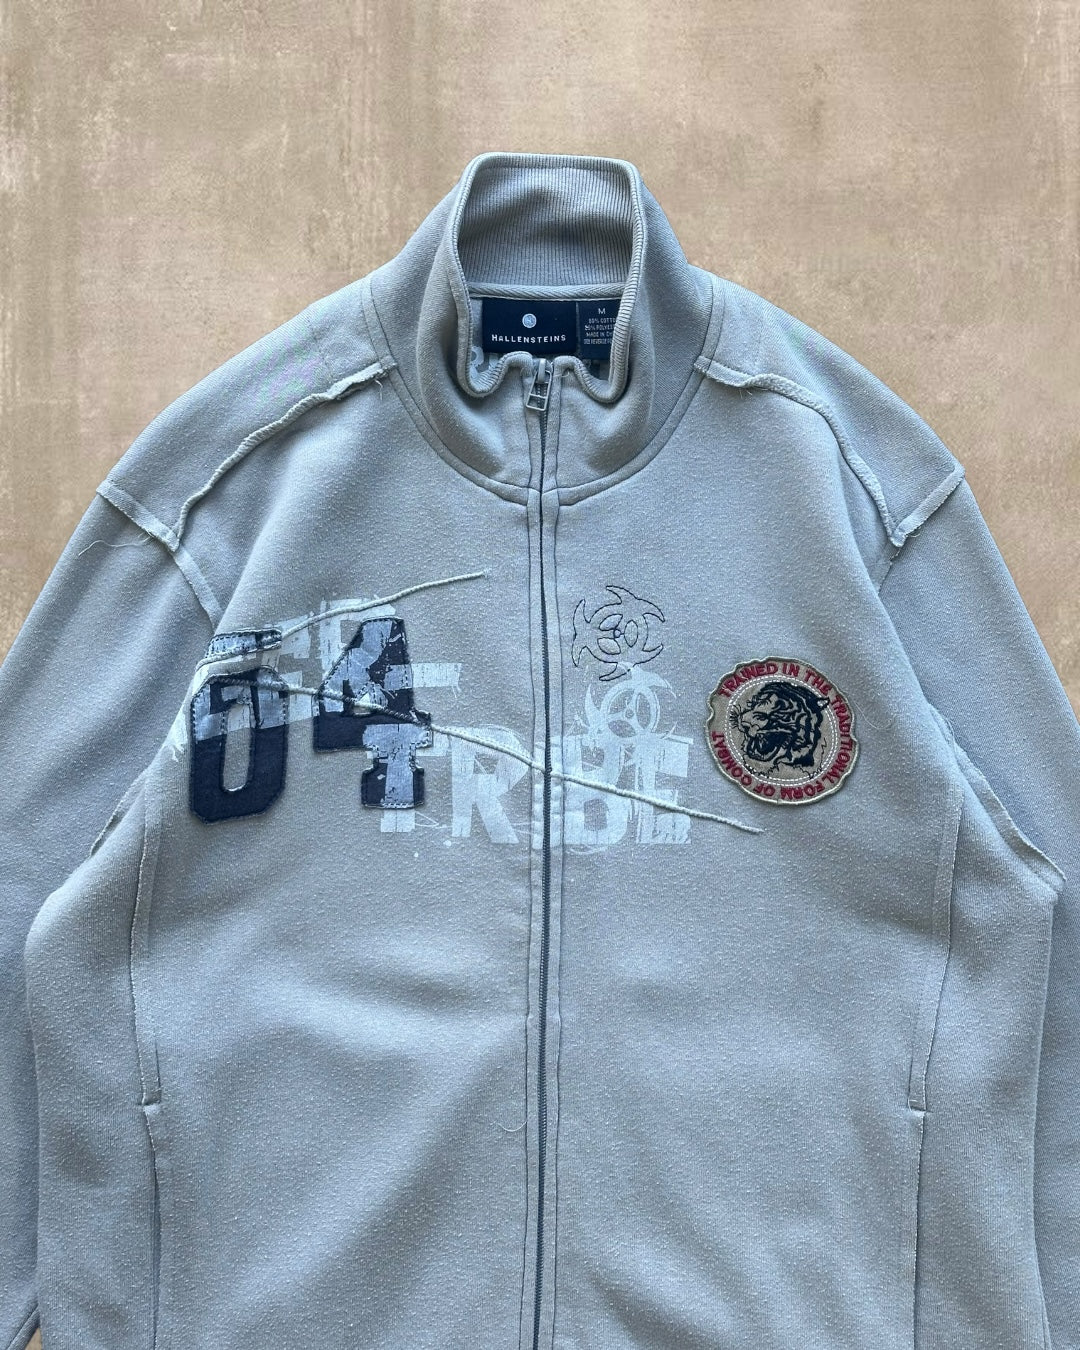 00s Tribe Zip Up - M/L